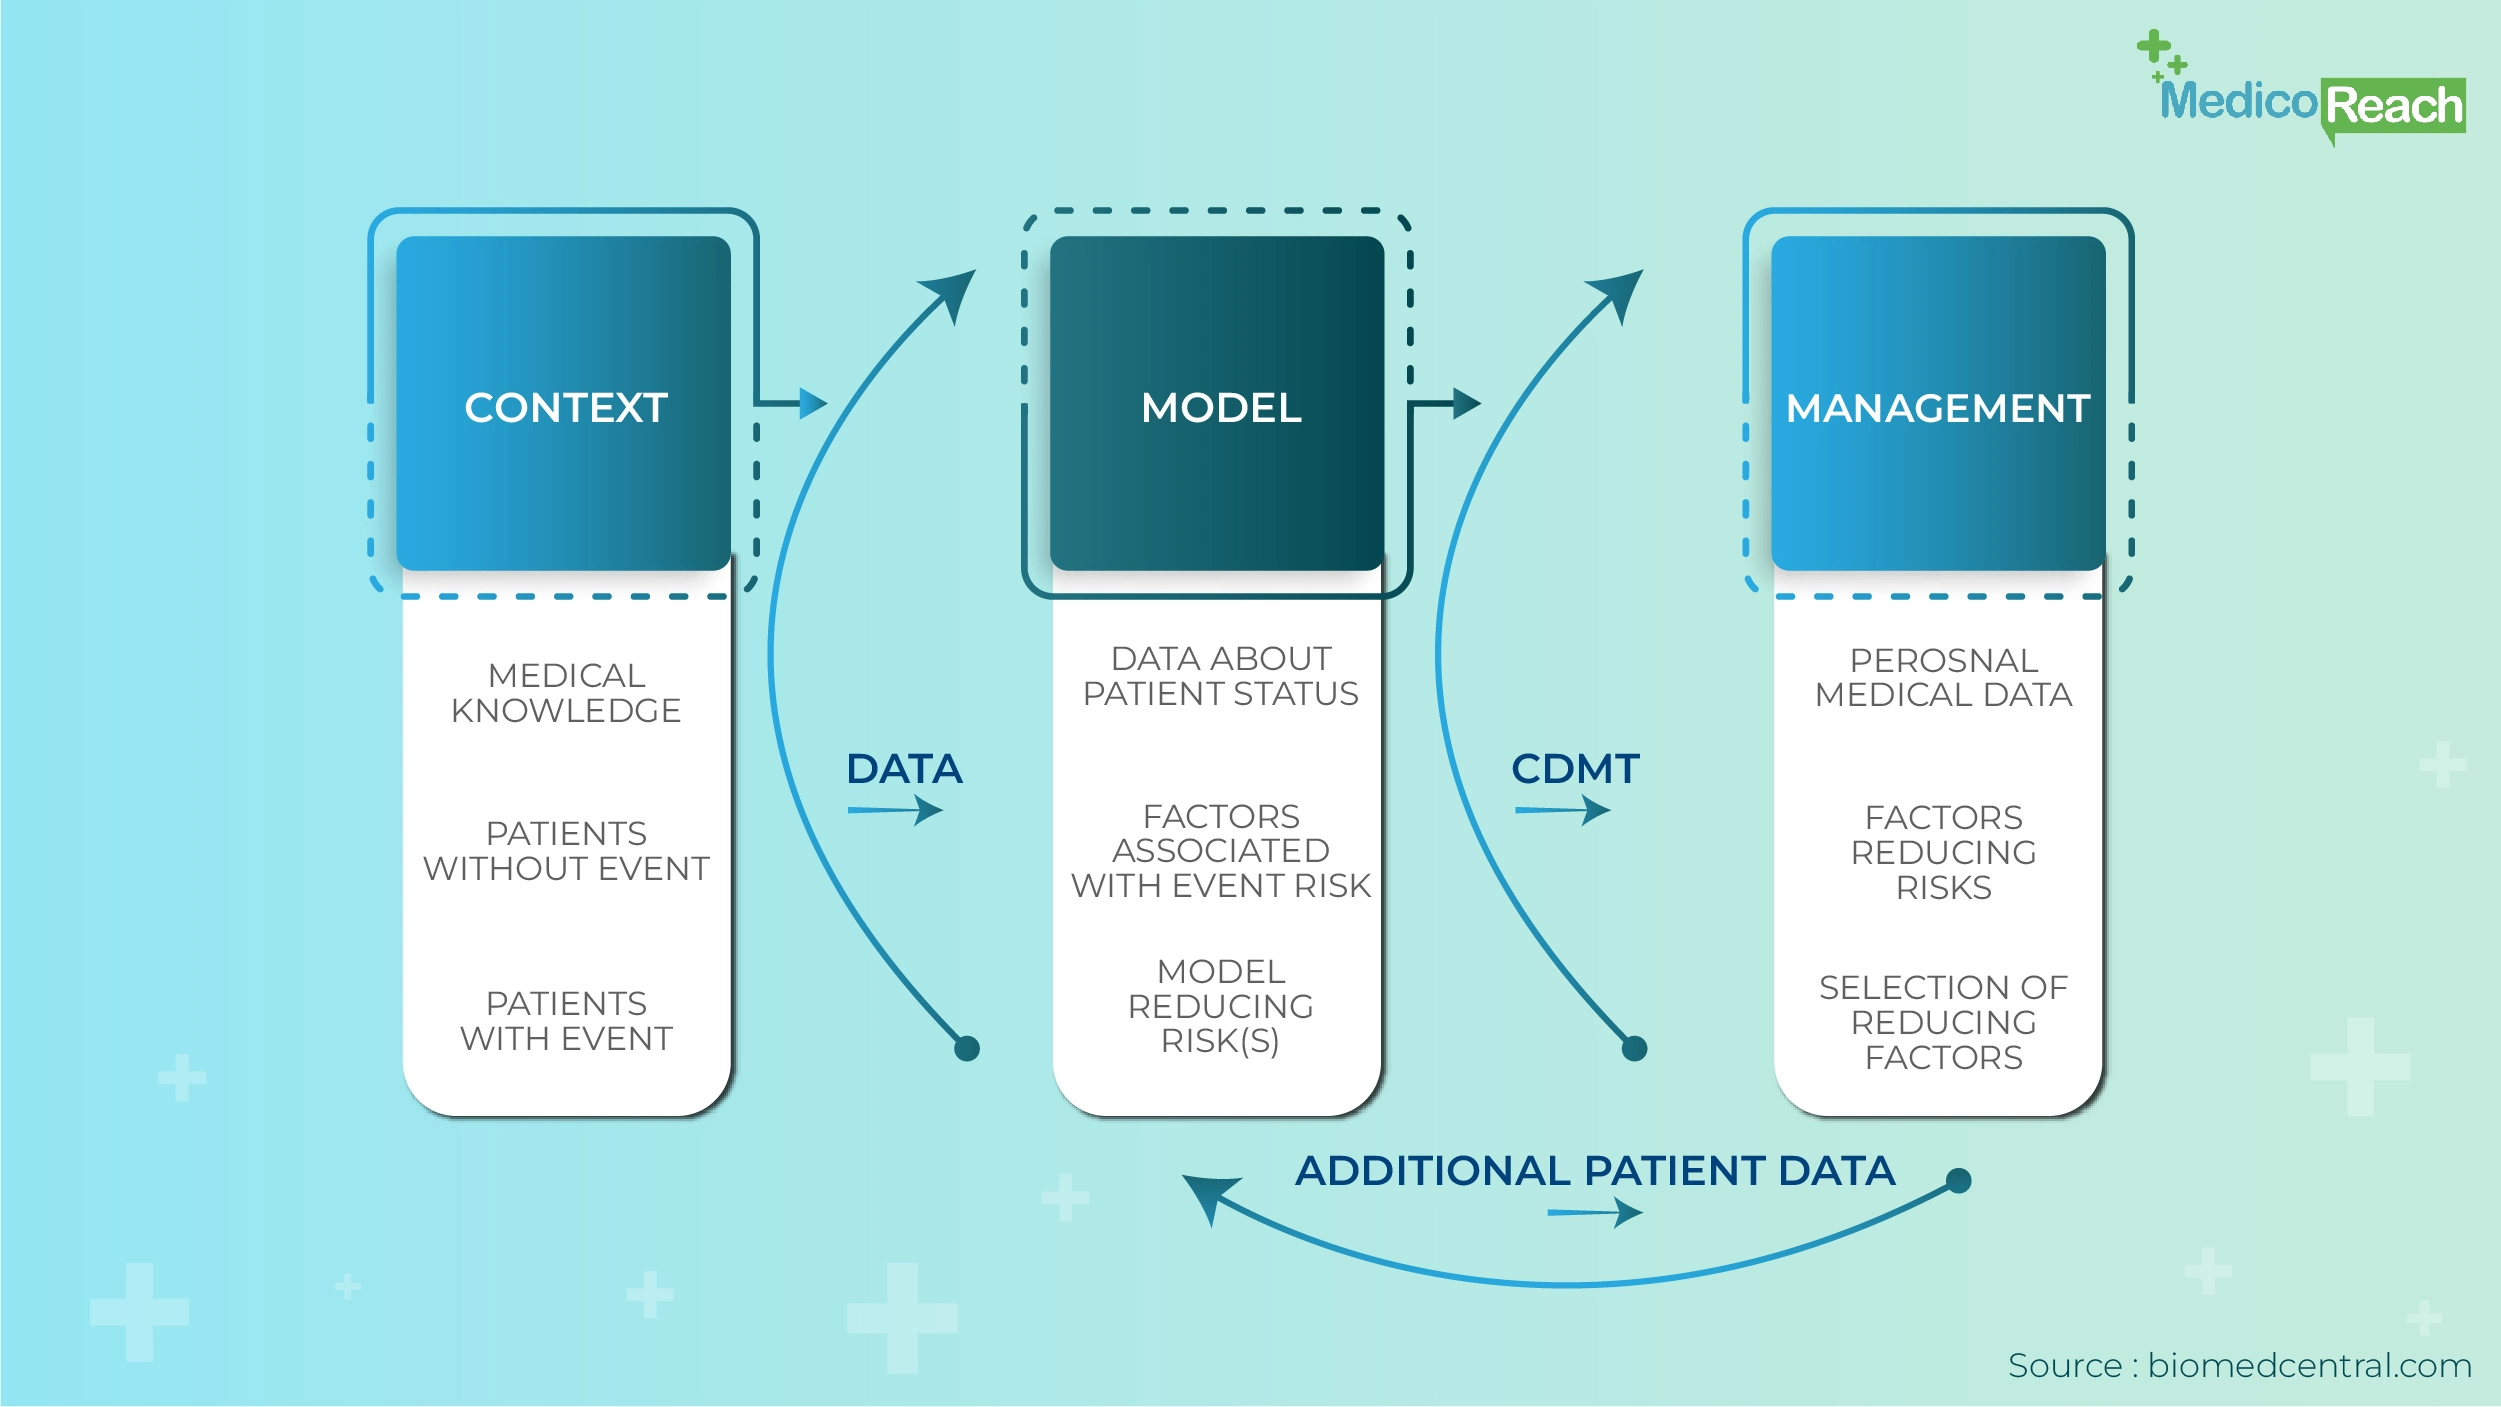 Overview of Decision Making in Healthcare Management